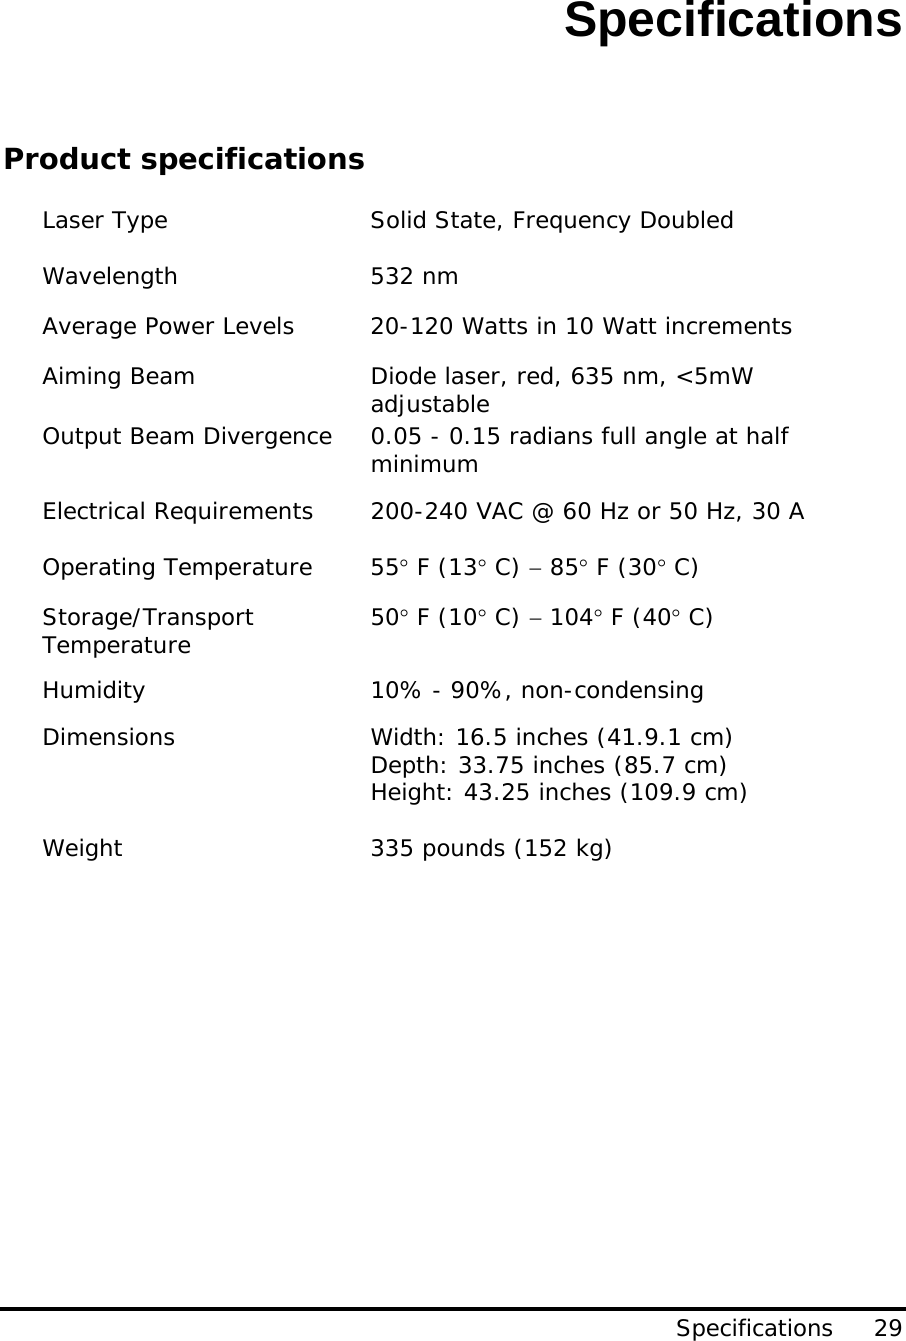 Specifications Specifications     29       Product specifications  Laser Type  Solid State, Frequency Doubled   Wavelength 532 nm Average Power Levels  20-120 Watts in 10 Watt increments Aiming Beam  Diode laser, red, 635 nm, &lt;5mW adjustable Output Beam Divergence  0.05 - 0.15 radians full angle at half minimum Electrical Requirements  200-240 VAC @ 60 Hz or 50 Hz, 30 A  Operating Temperature  55° F (13° C) − 85° F (30° C) Storage/Transport Temperature  50° F (10° C) − 104° F (40° C) Humidity  10% - 90%, non-condensing Dimensions  Width: 16.5 inches (41.9.1 cm) Depth: 33.75 inches (85.7 cm)   Height: 43.25 inches (109.9 cm)  Weight  335 pounds (152 kg) 